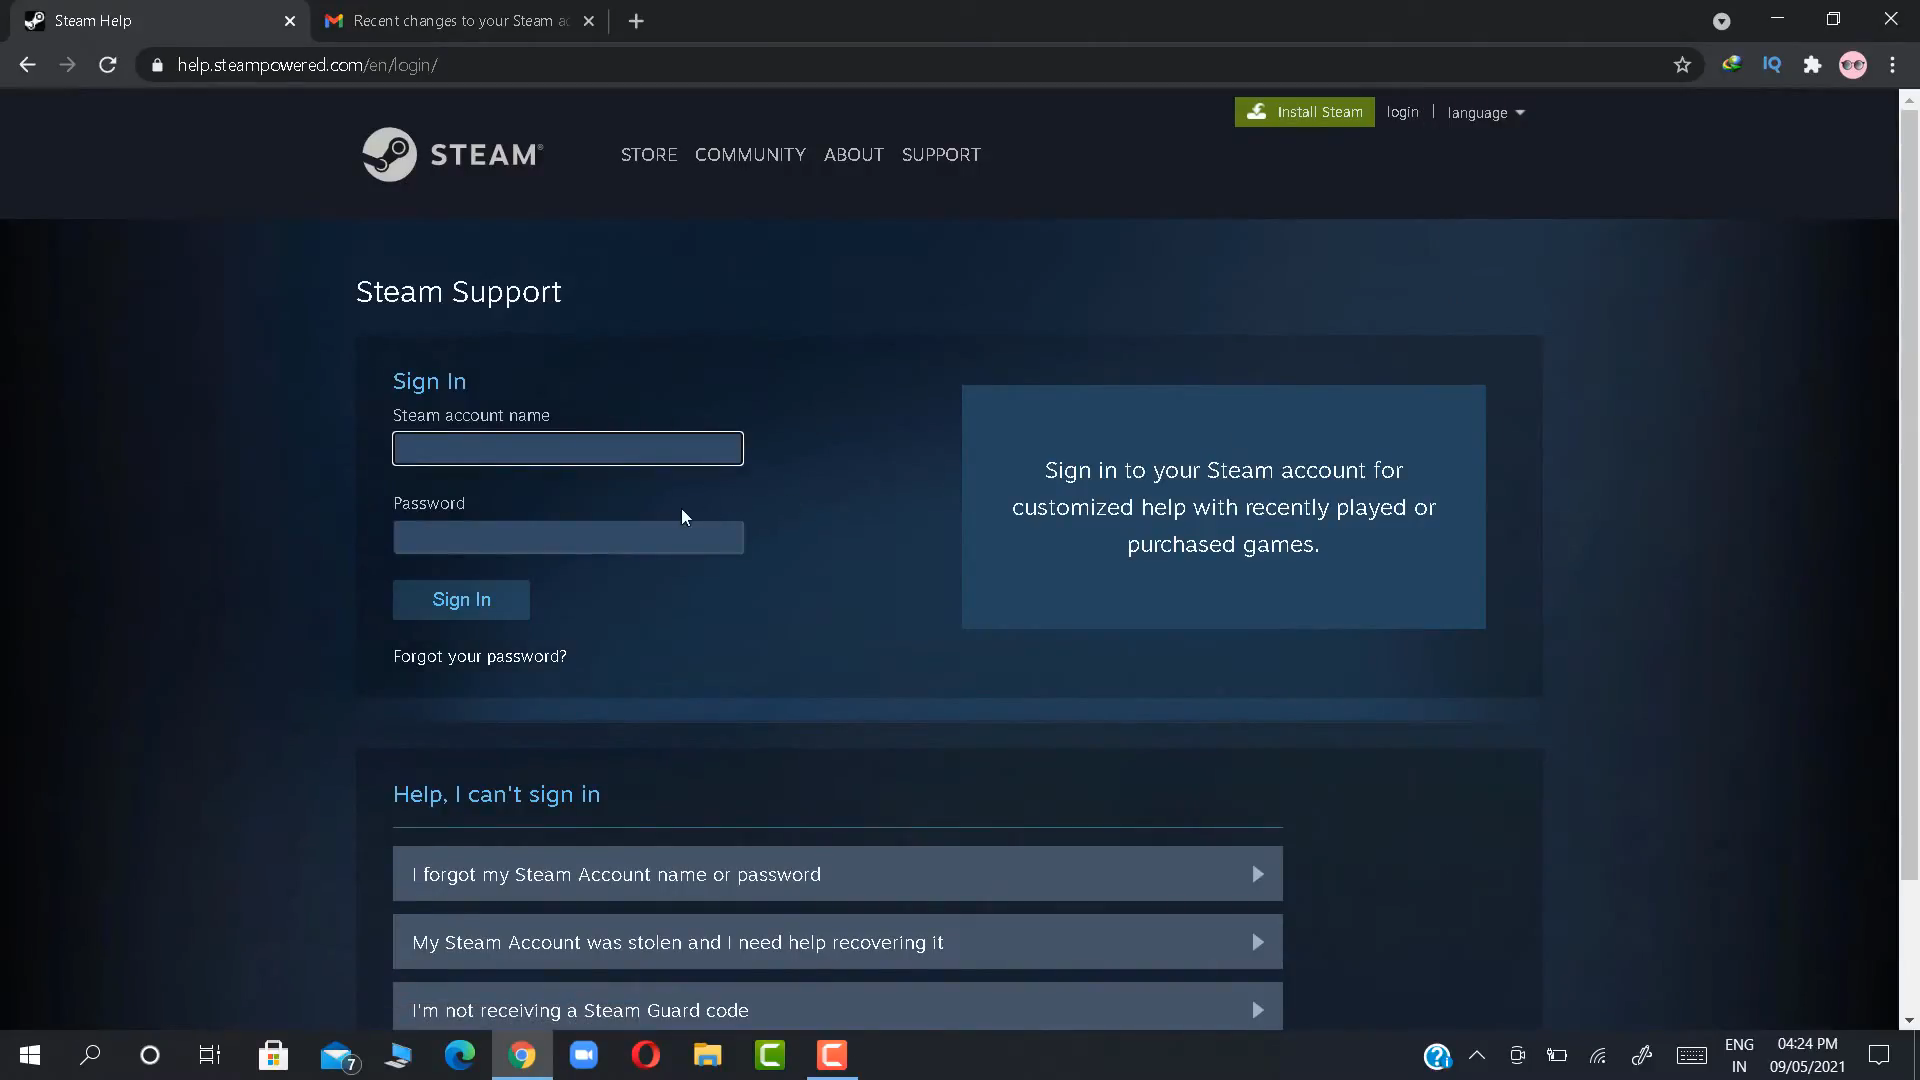 So log into the steam account.